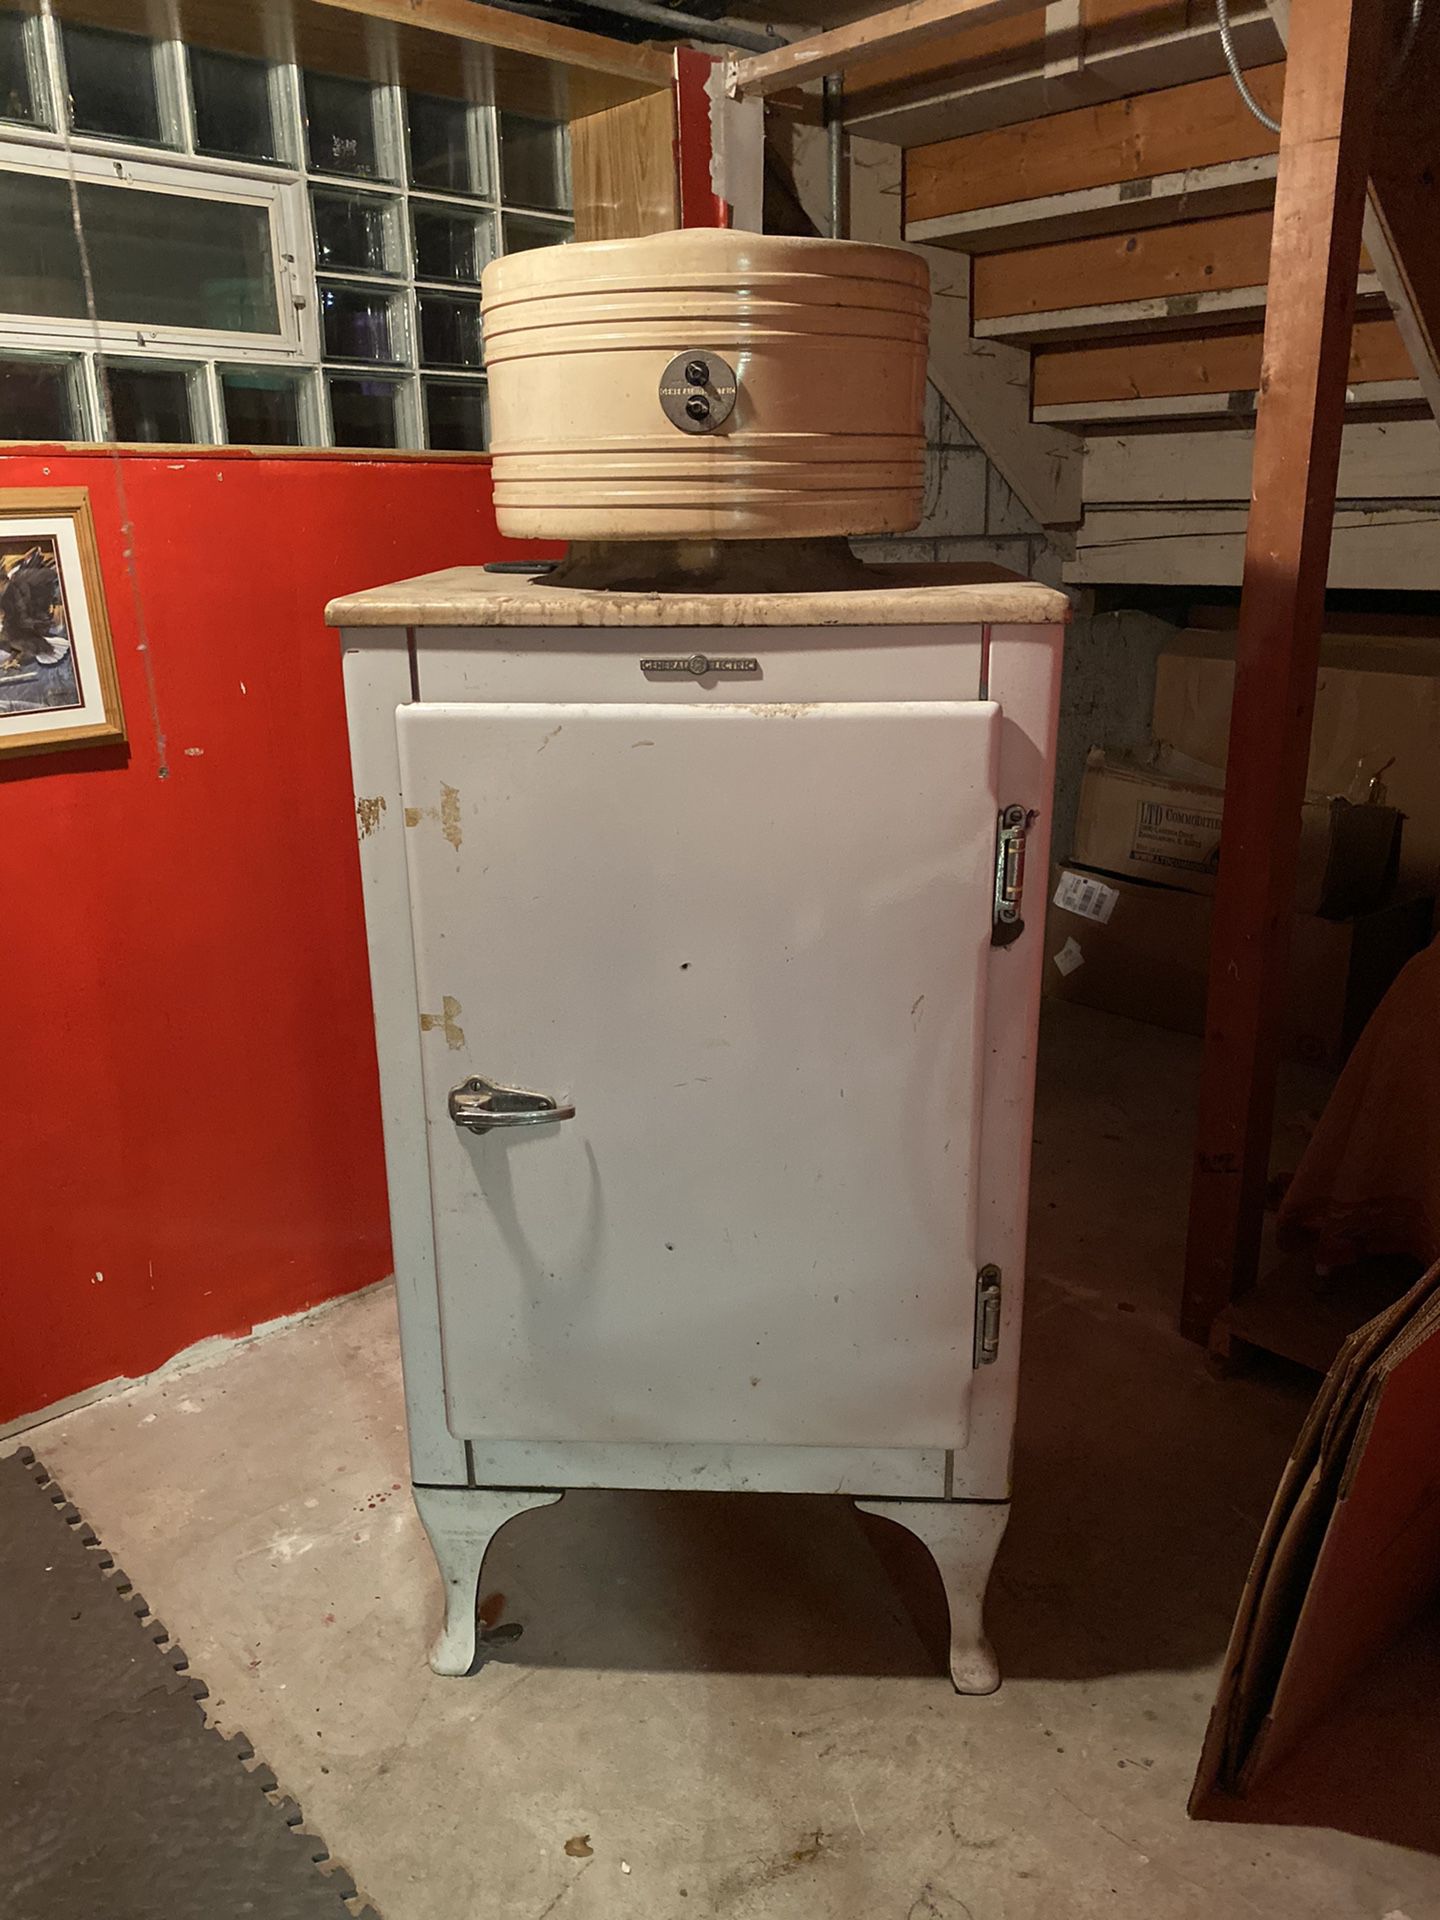 Old General Electric Refrigerator